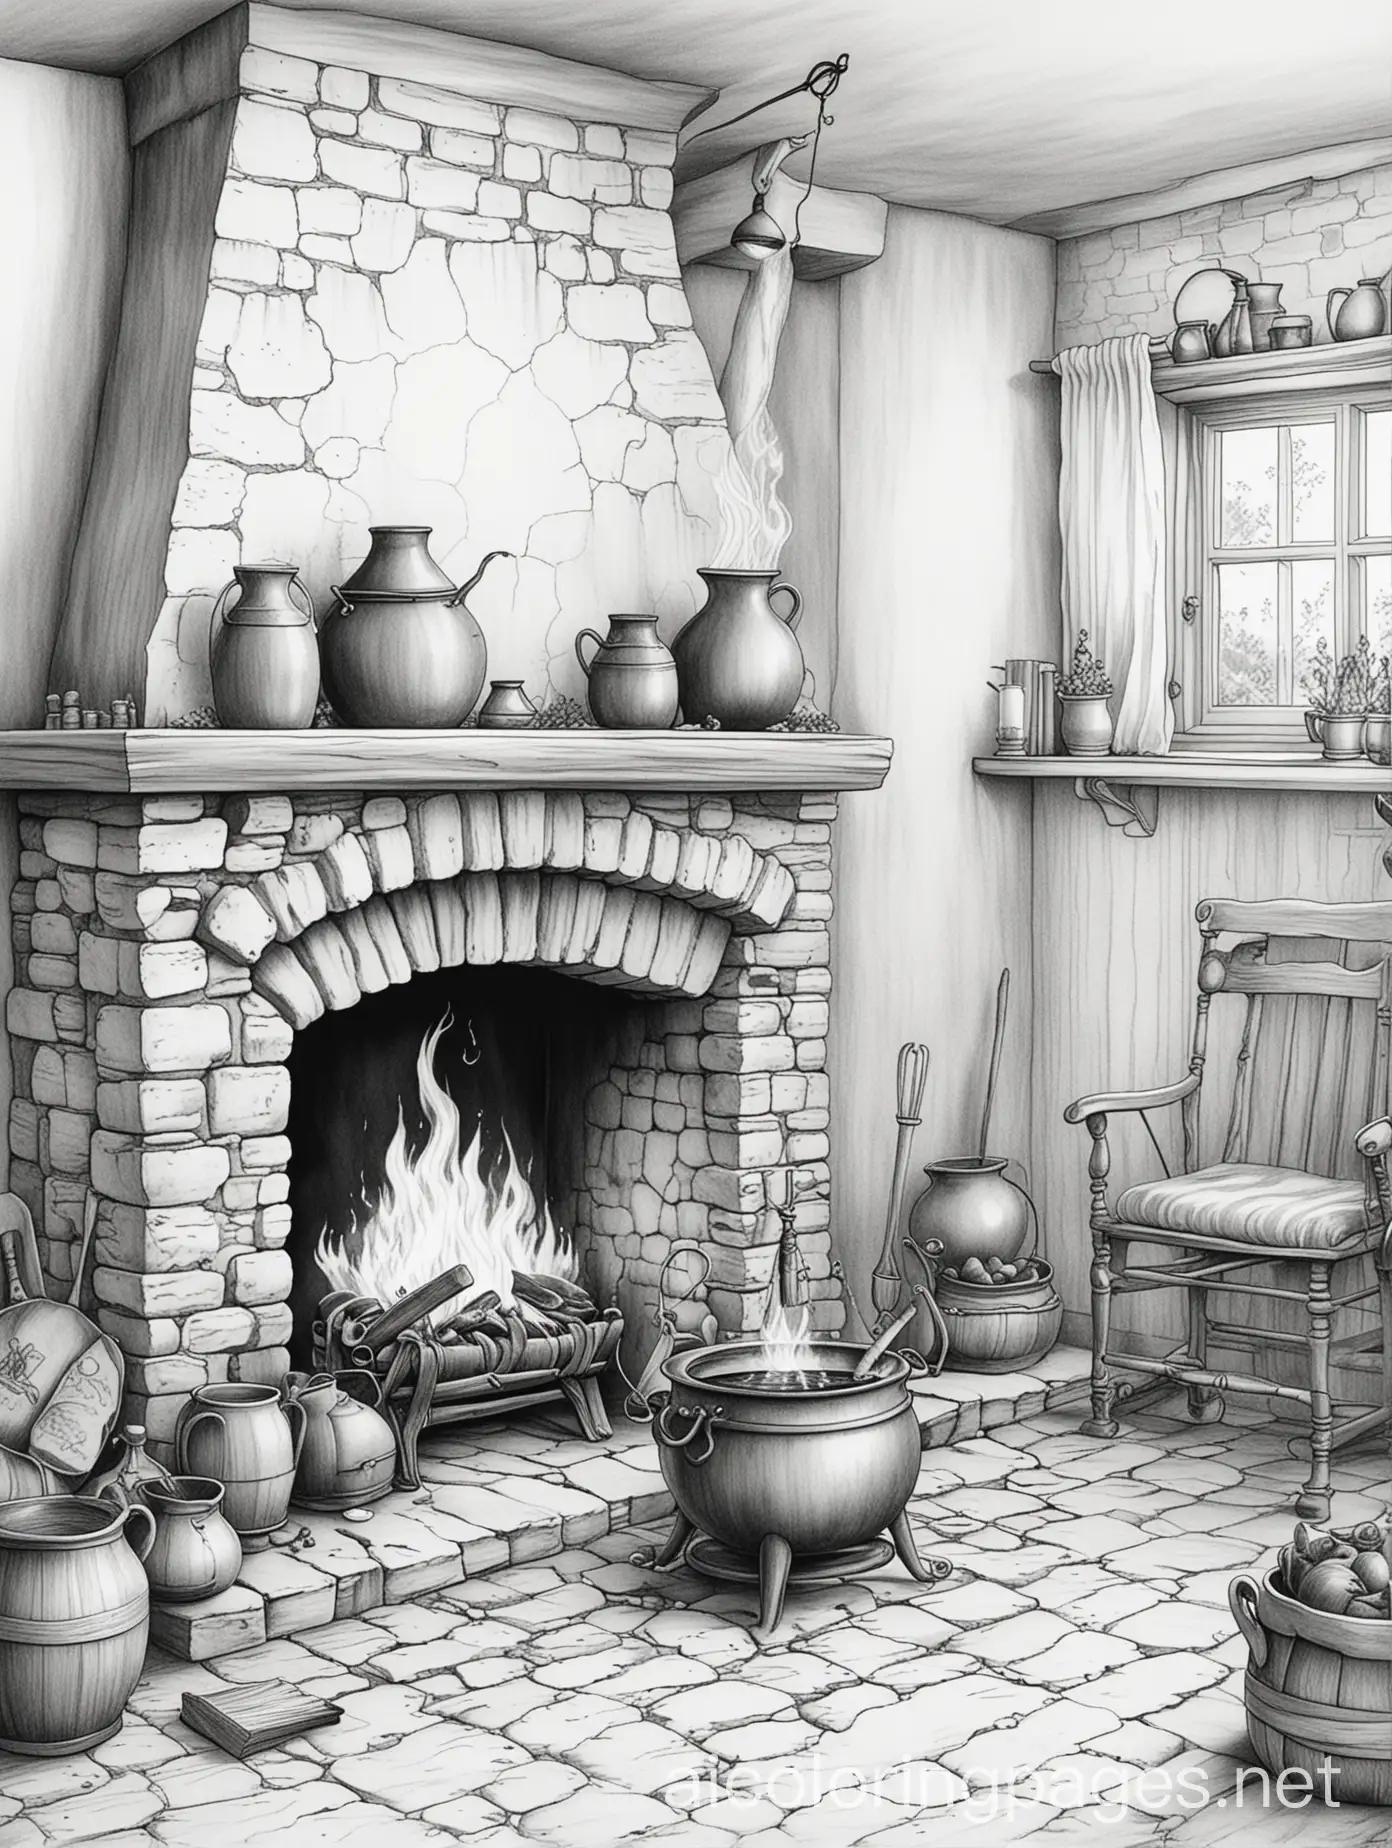 witches cottage with a cauldron bubbling over a fireplace , Coloring Page, black and white, line art, white background, Simplicity, Ample White Space. The background of the coloring page is plain white to make it easy for young children to color within the lines. The outlines of all the subjects are easy to distinguish, making it simple for kids to color without too much difficulty